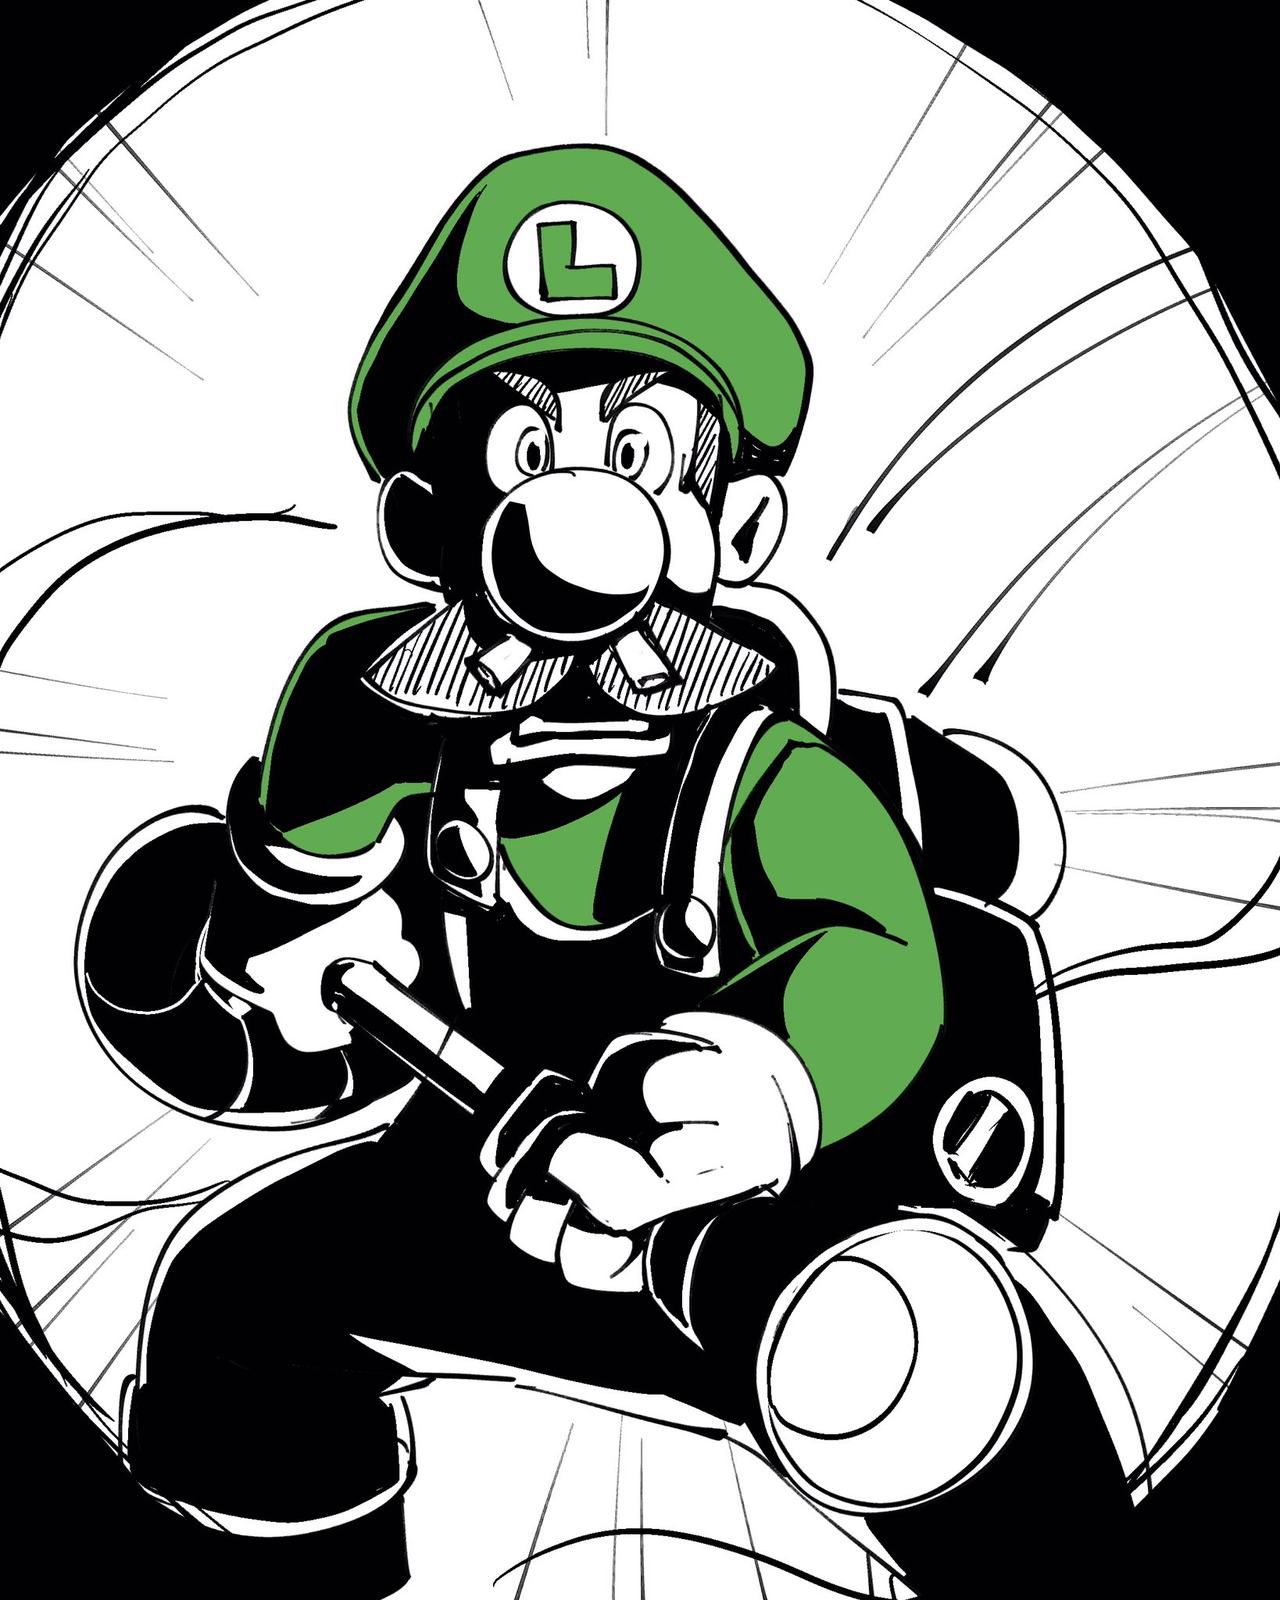 [Nisego] Inktober 2019 (Super Mario Brothers) [Ongoing] 25